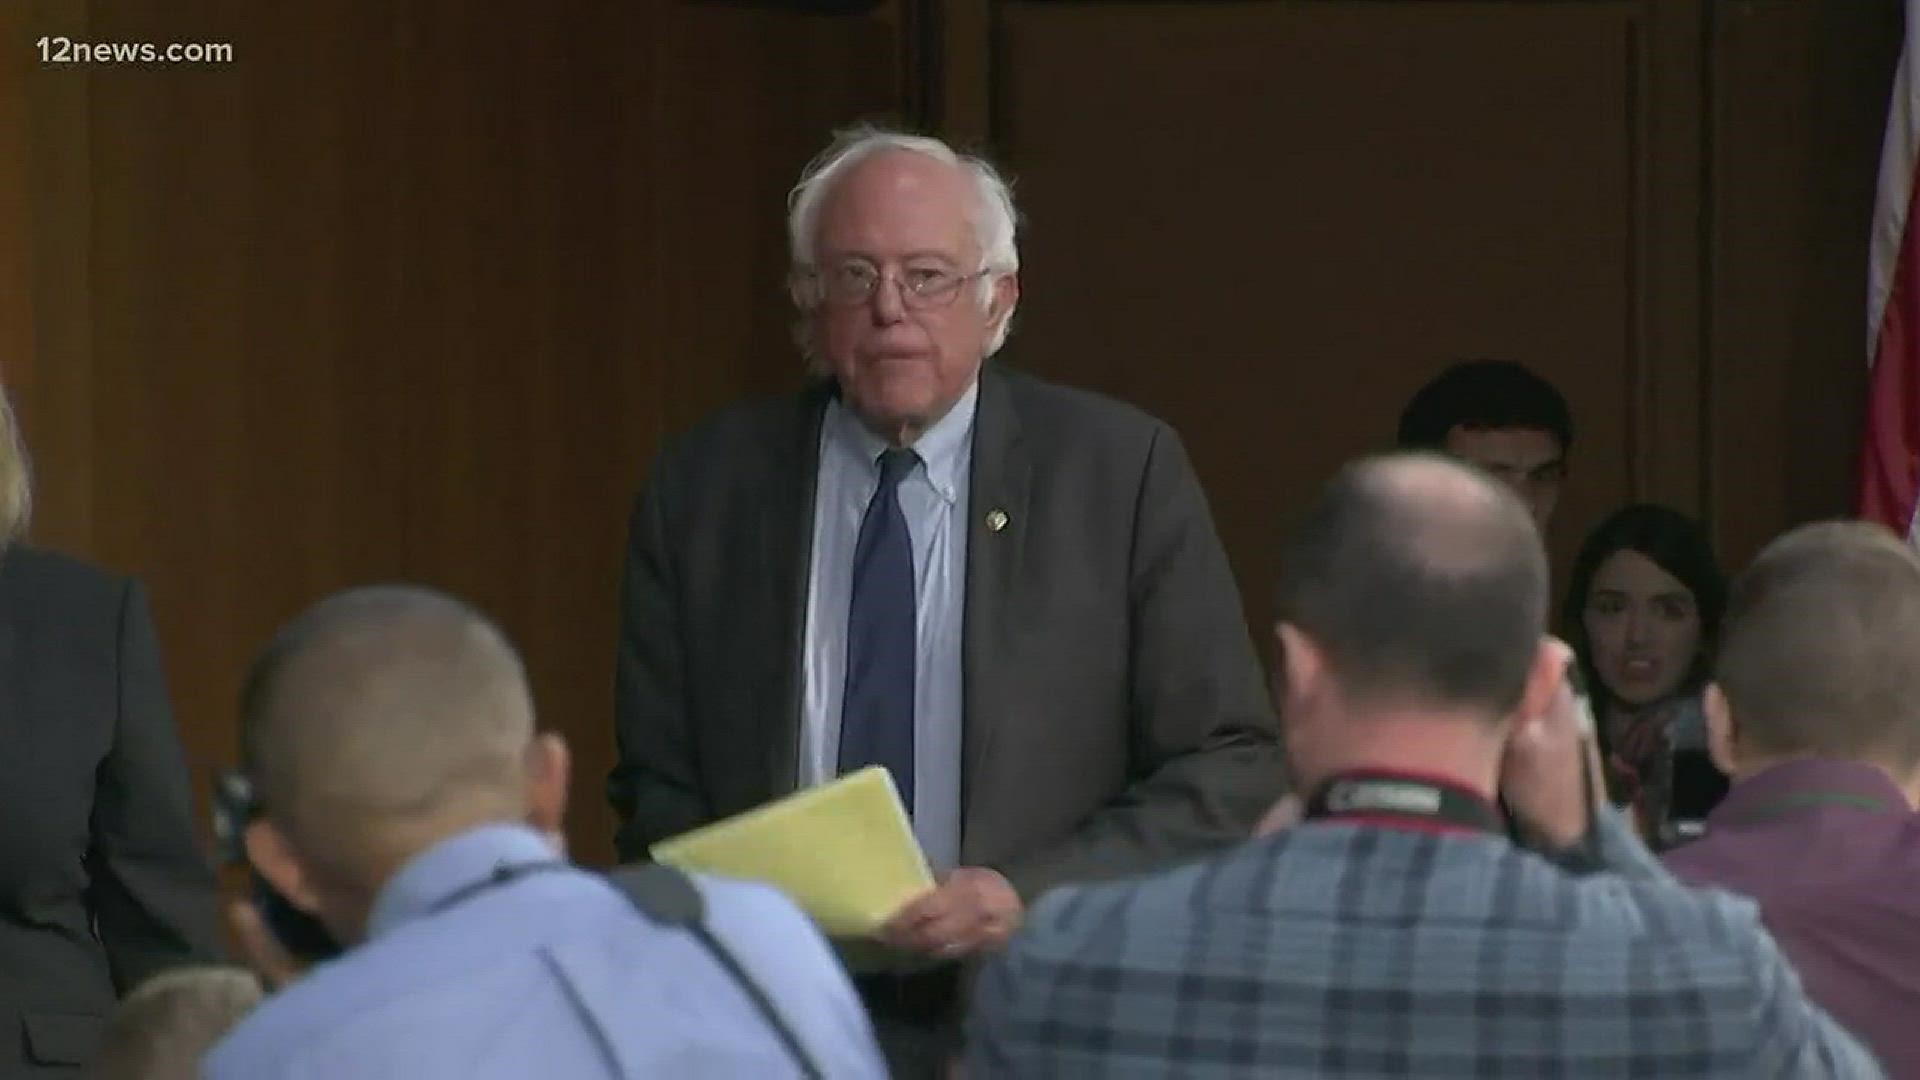 Bernie Sanders expected to speak on topics including immigration reform and health care.